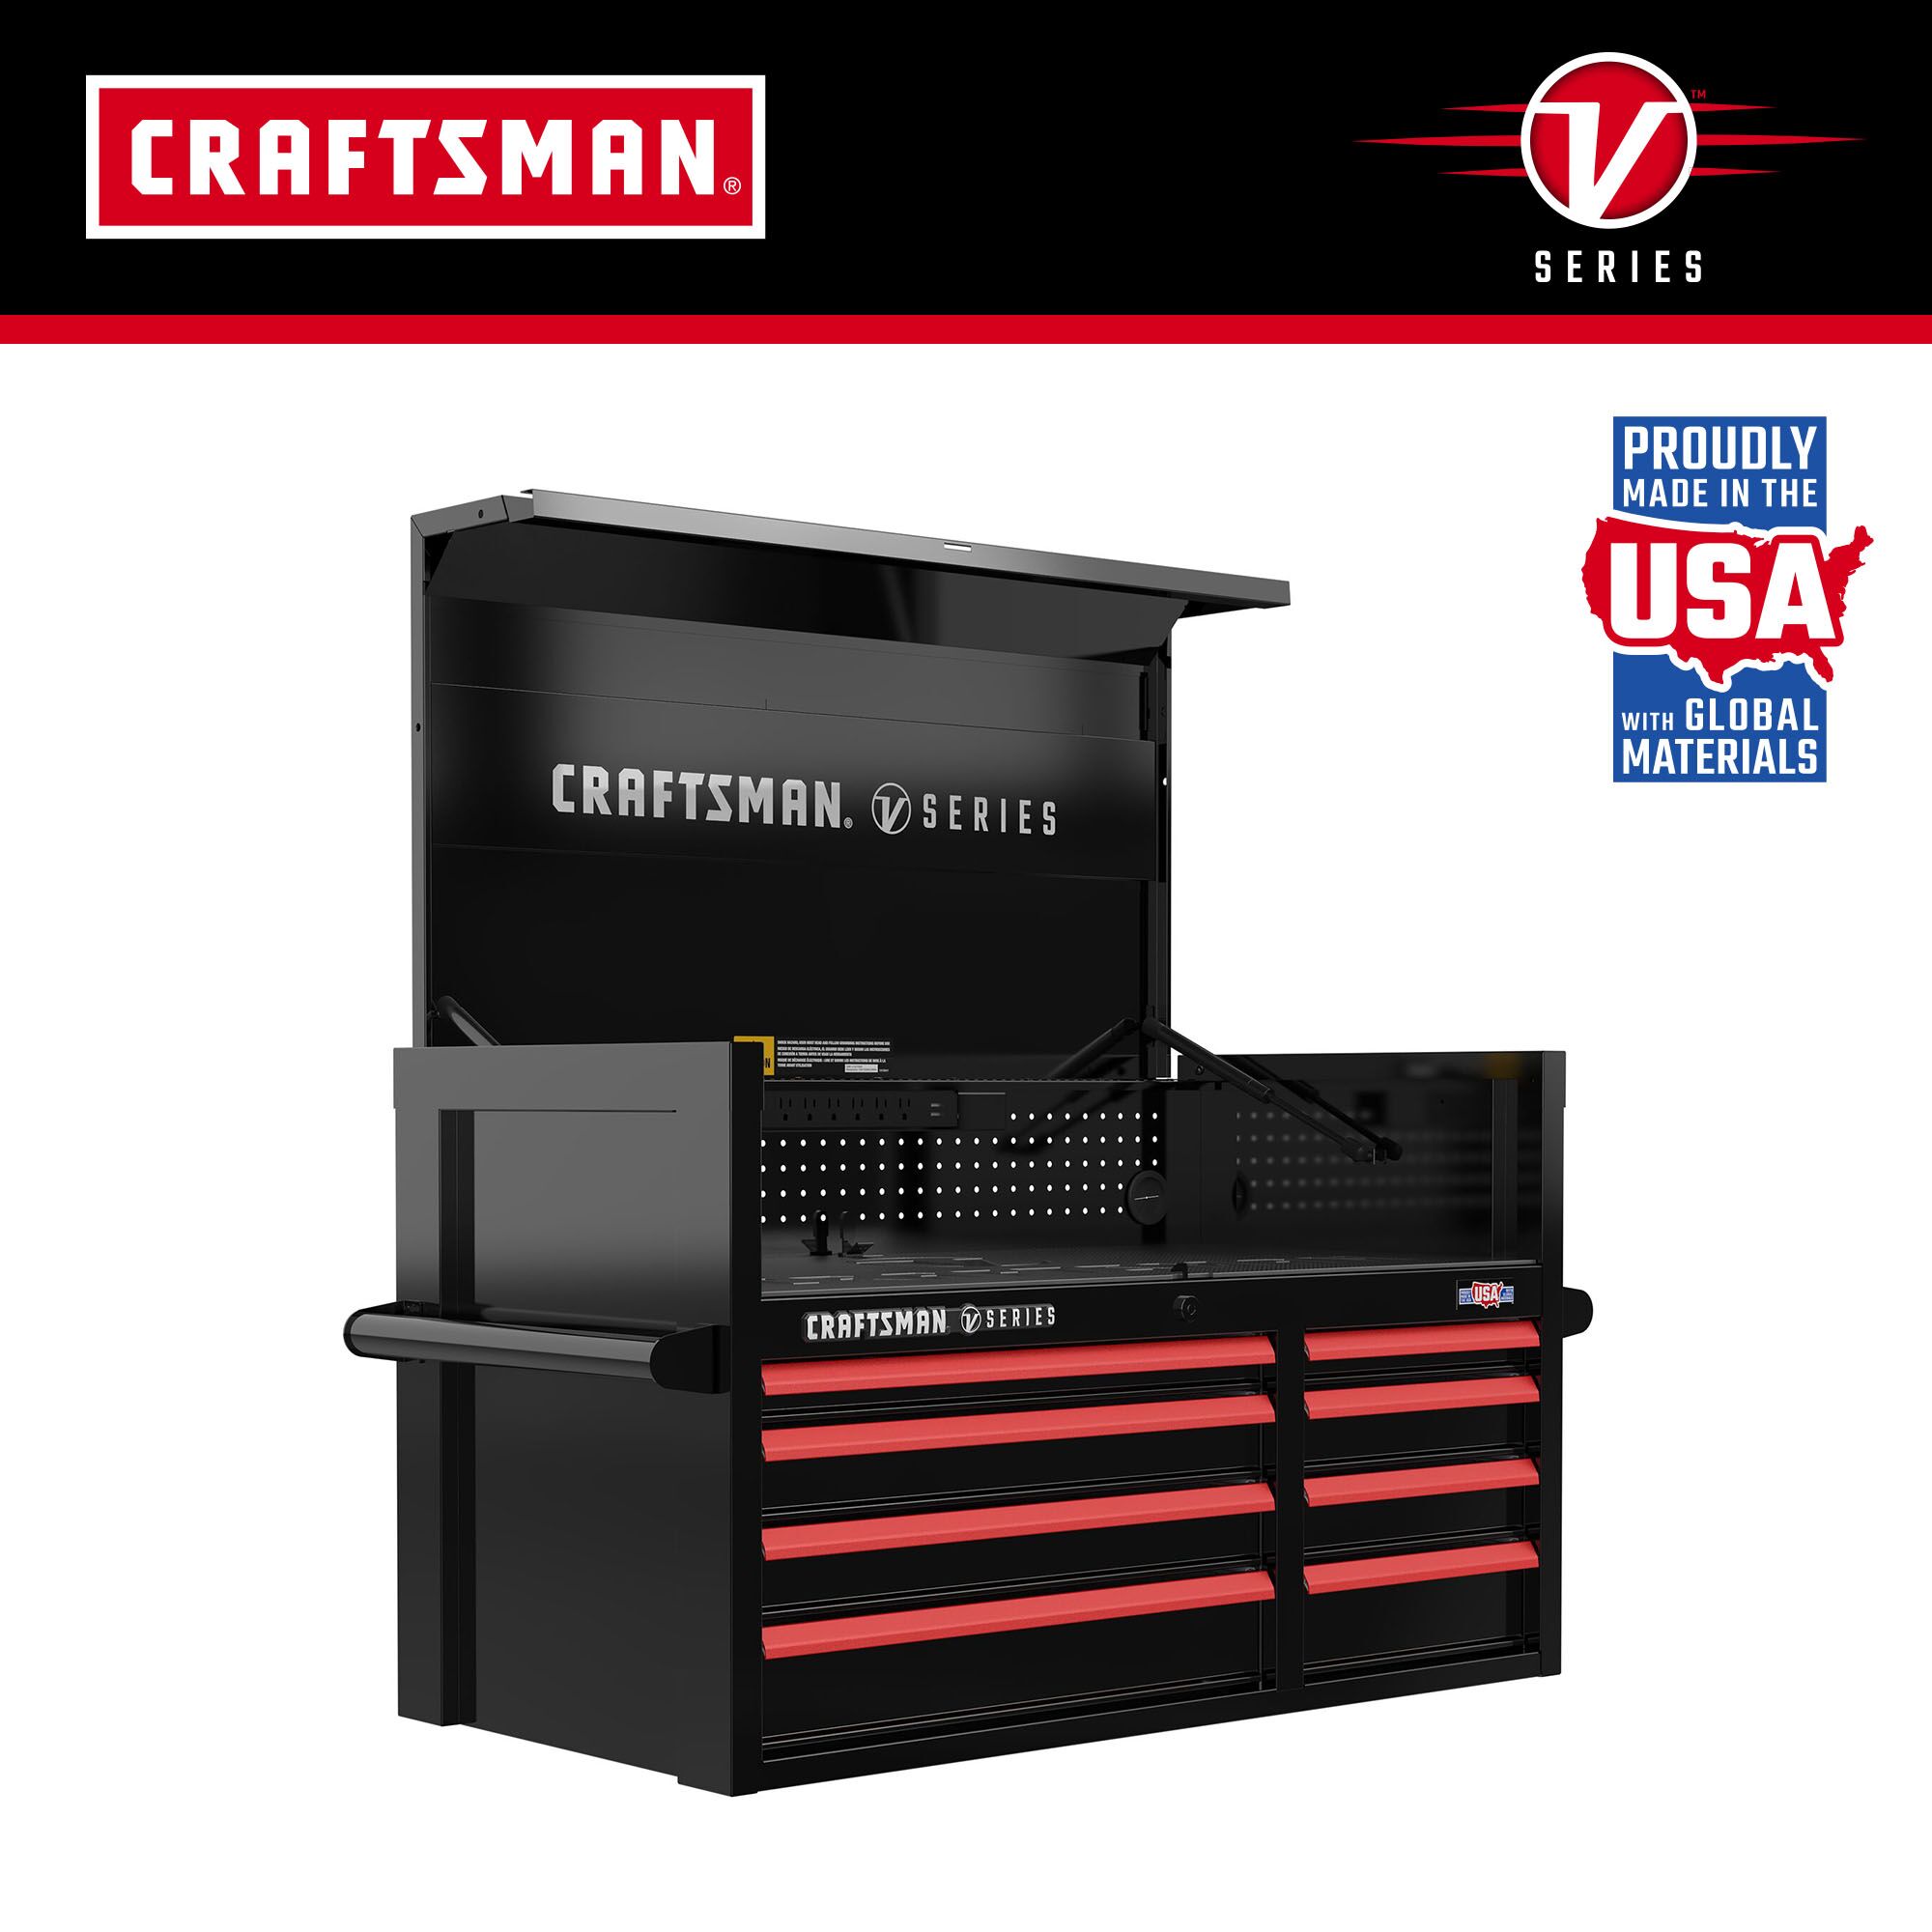 CRAFTSMAN V-Series 41-in W x 27-in H 8-Drawer Steel Tool Chest